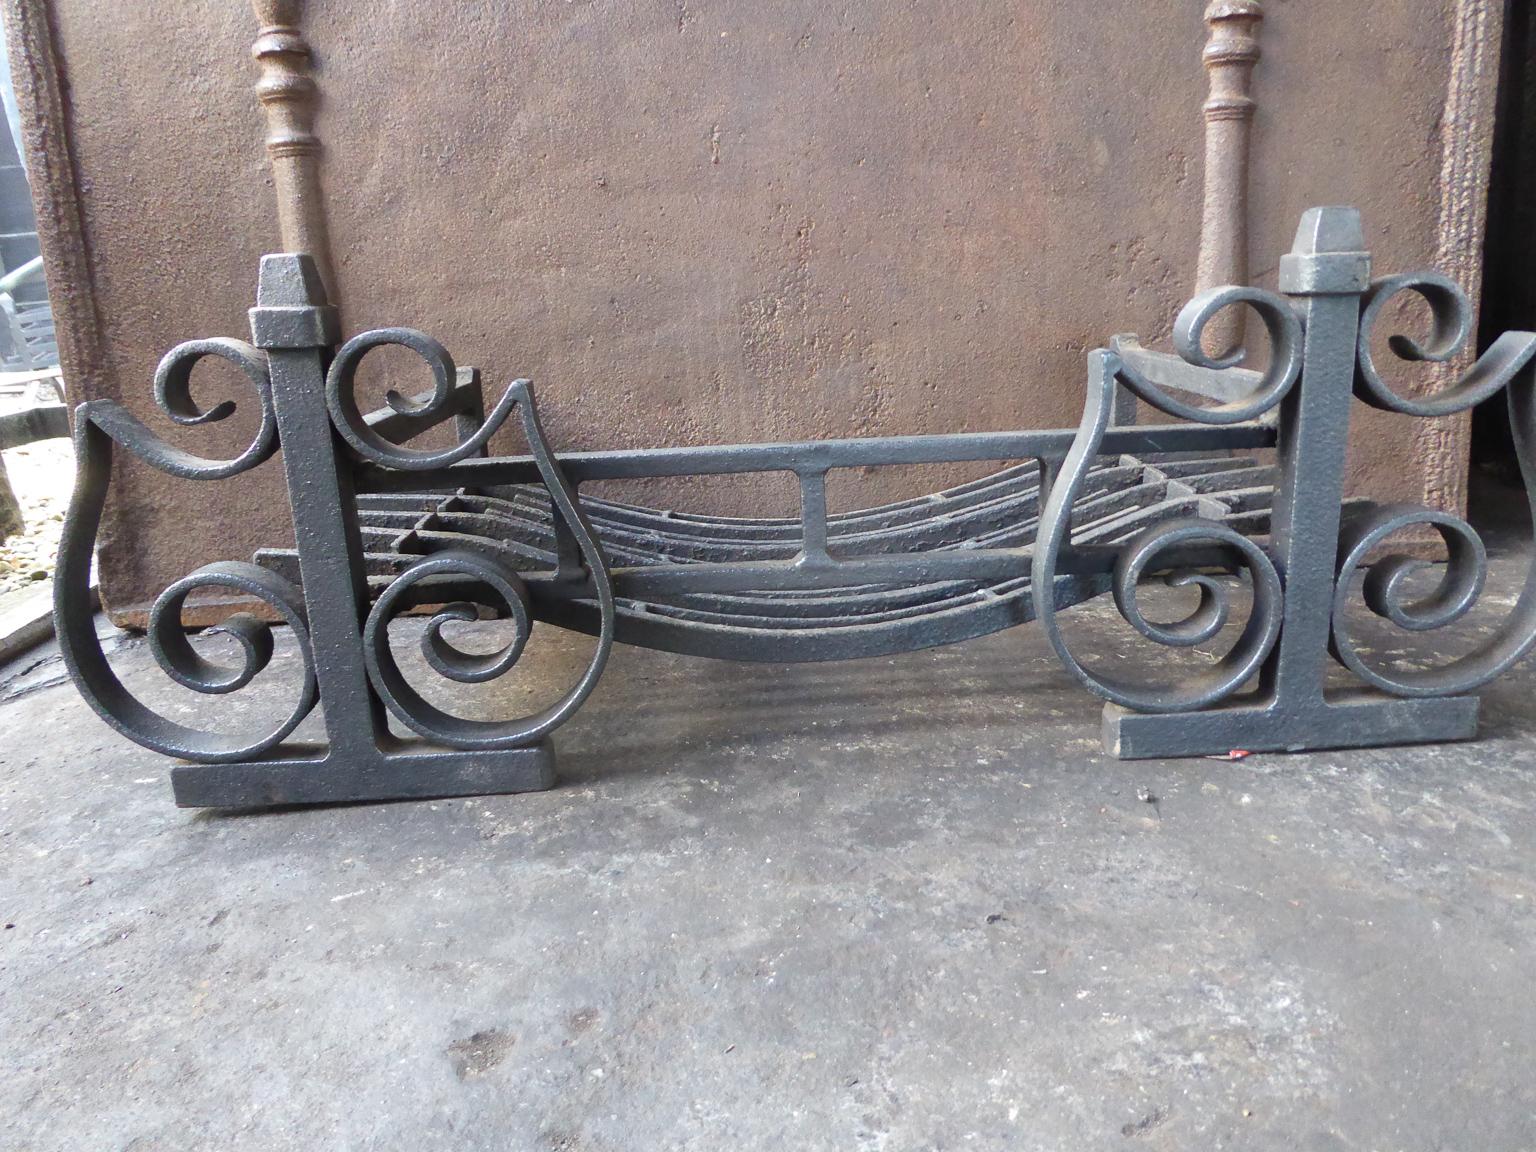 English Modernist Fireplace Grate, Fire Grate 1